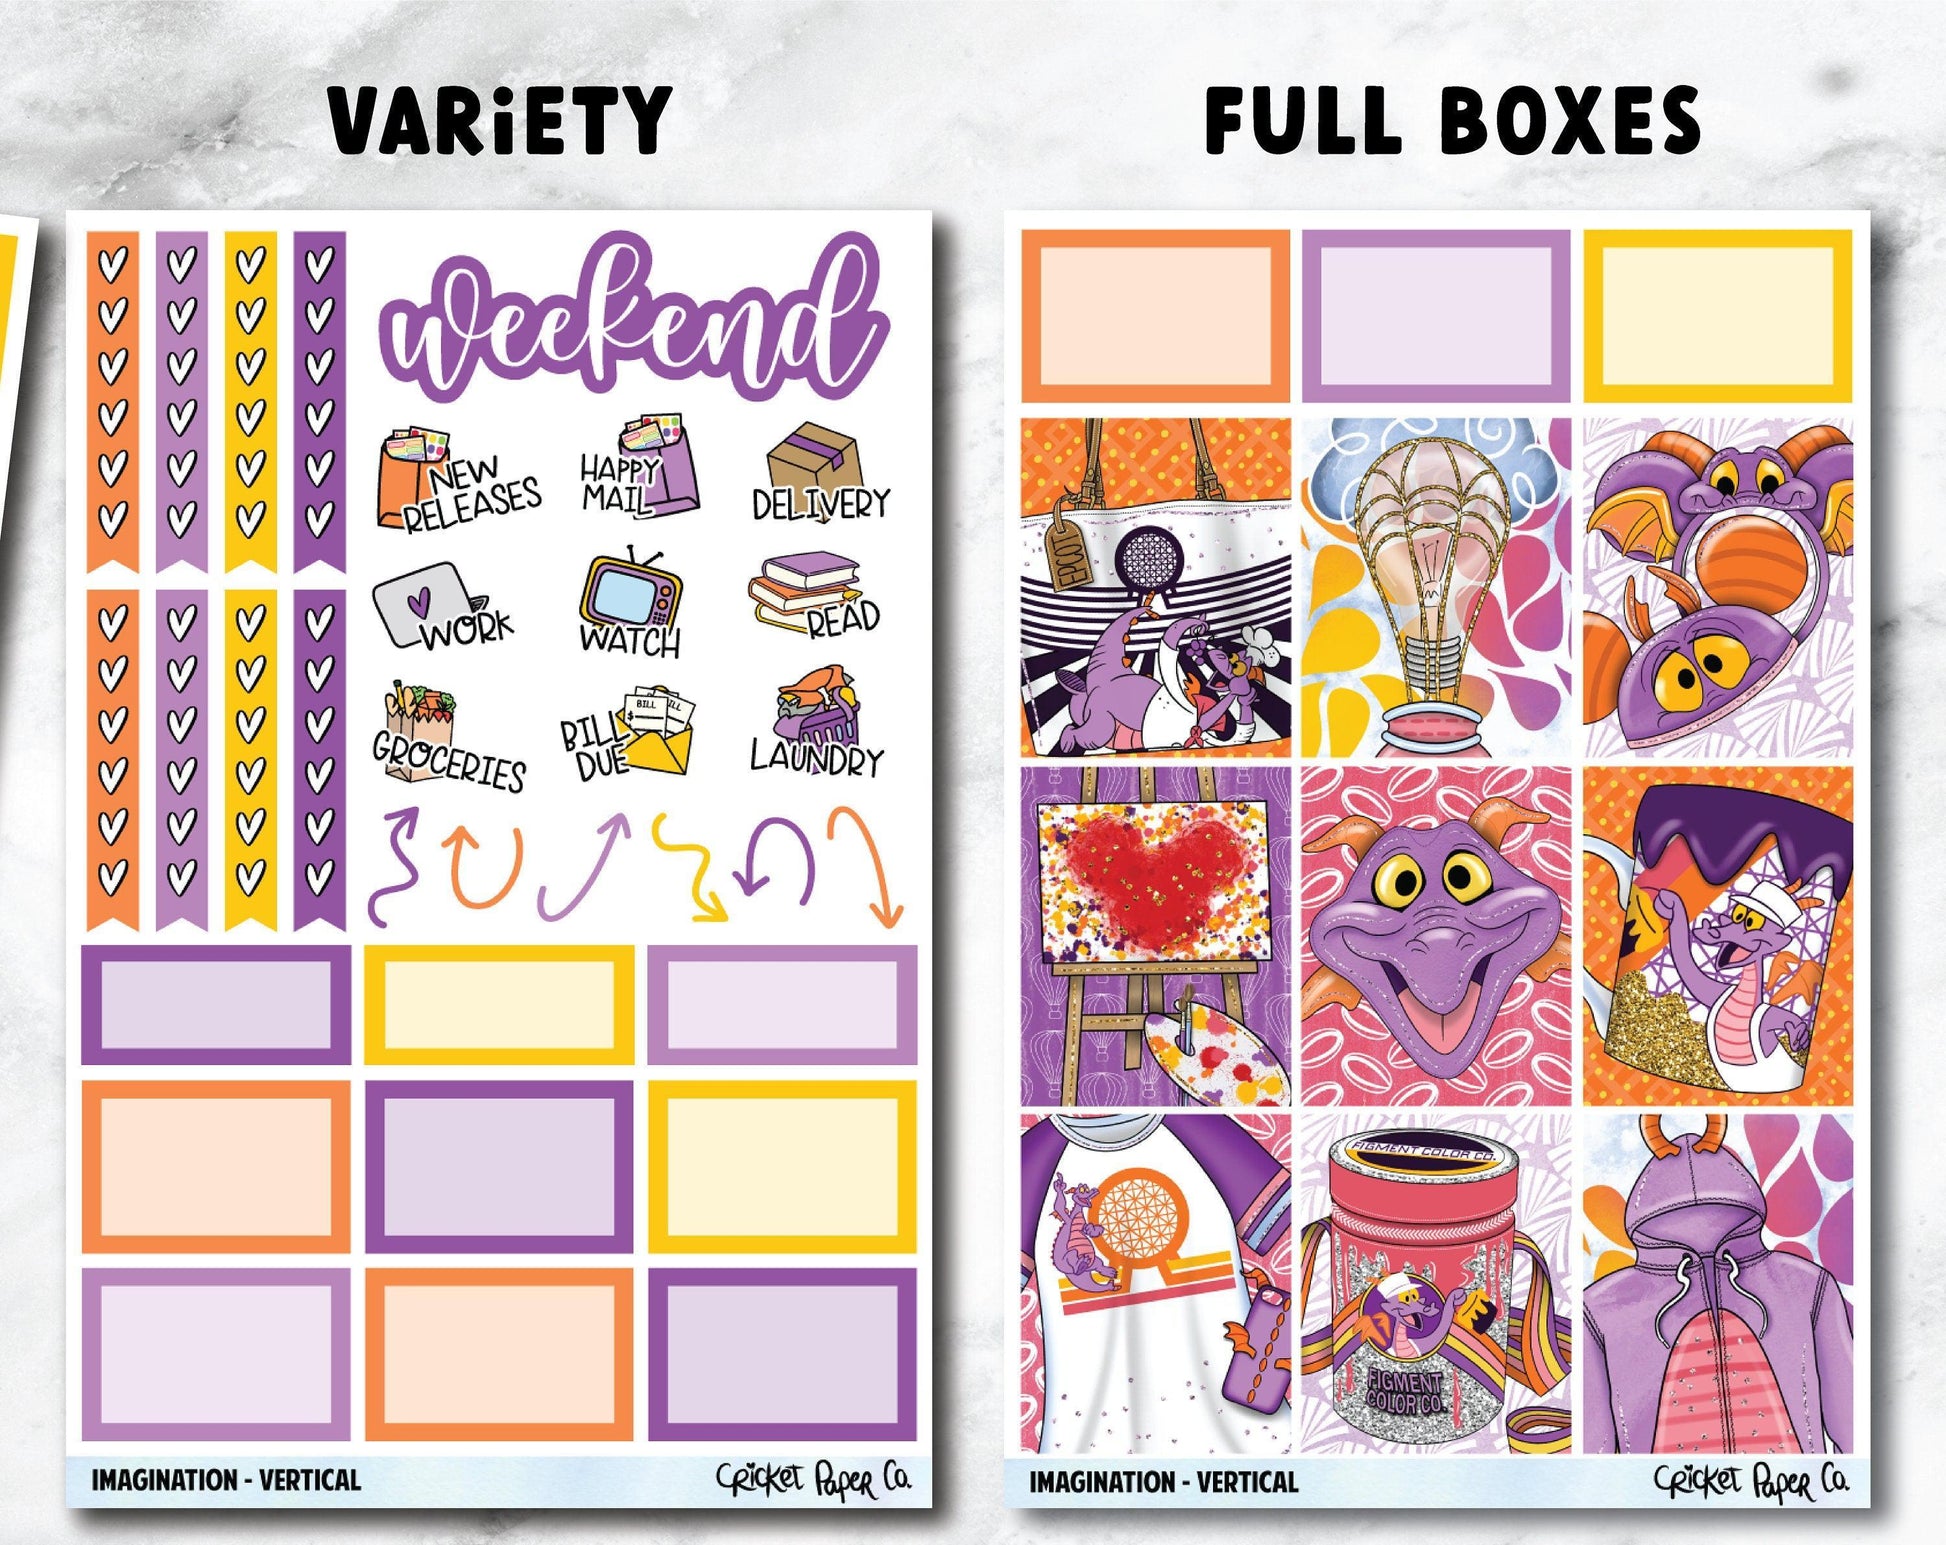 IMAGINATION Planner Stickers - Full Kit-Cricket Paper Co.